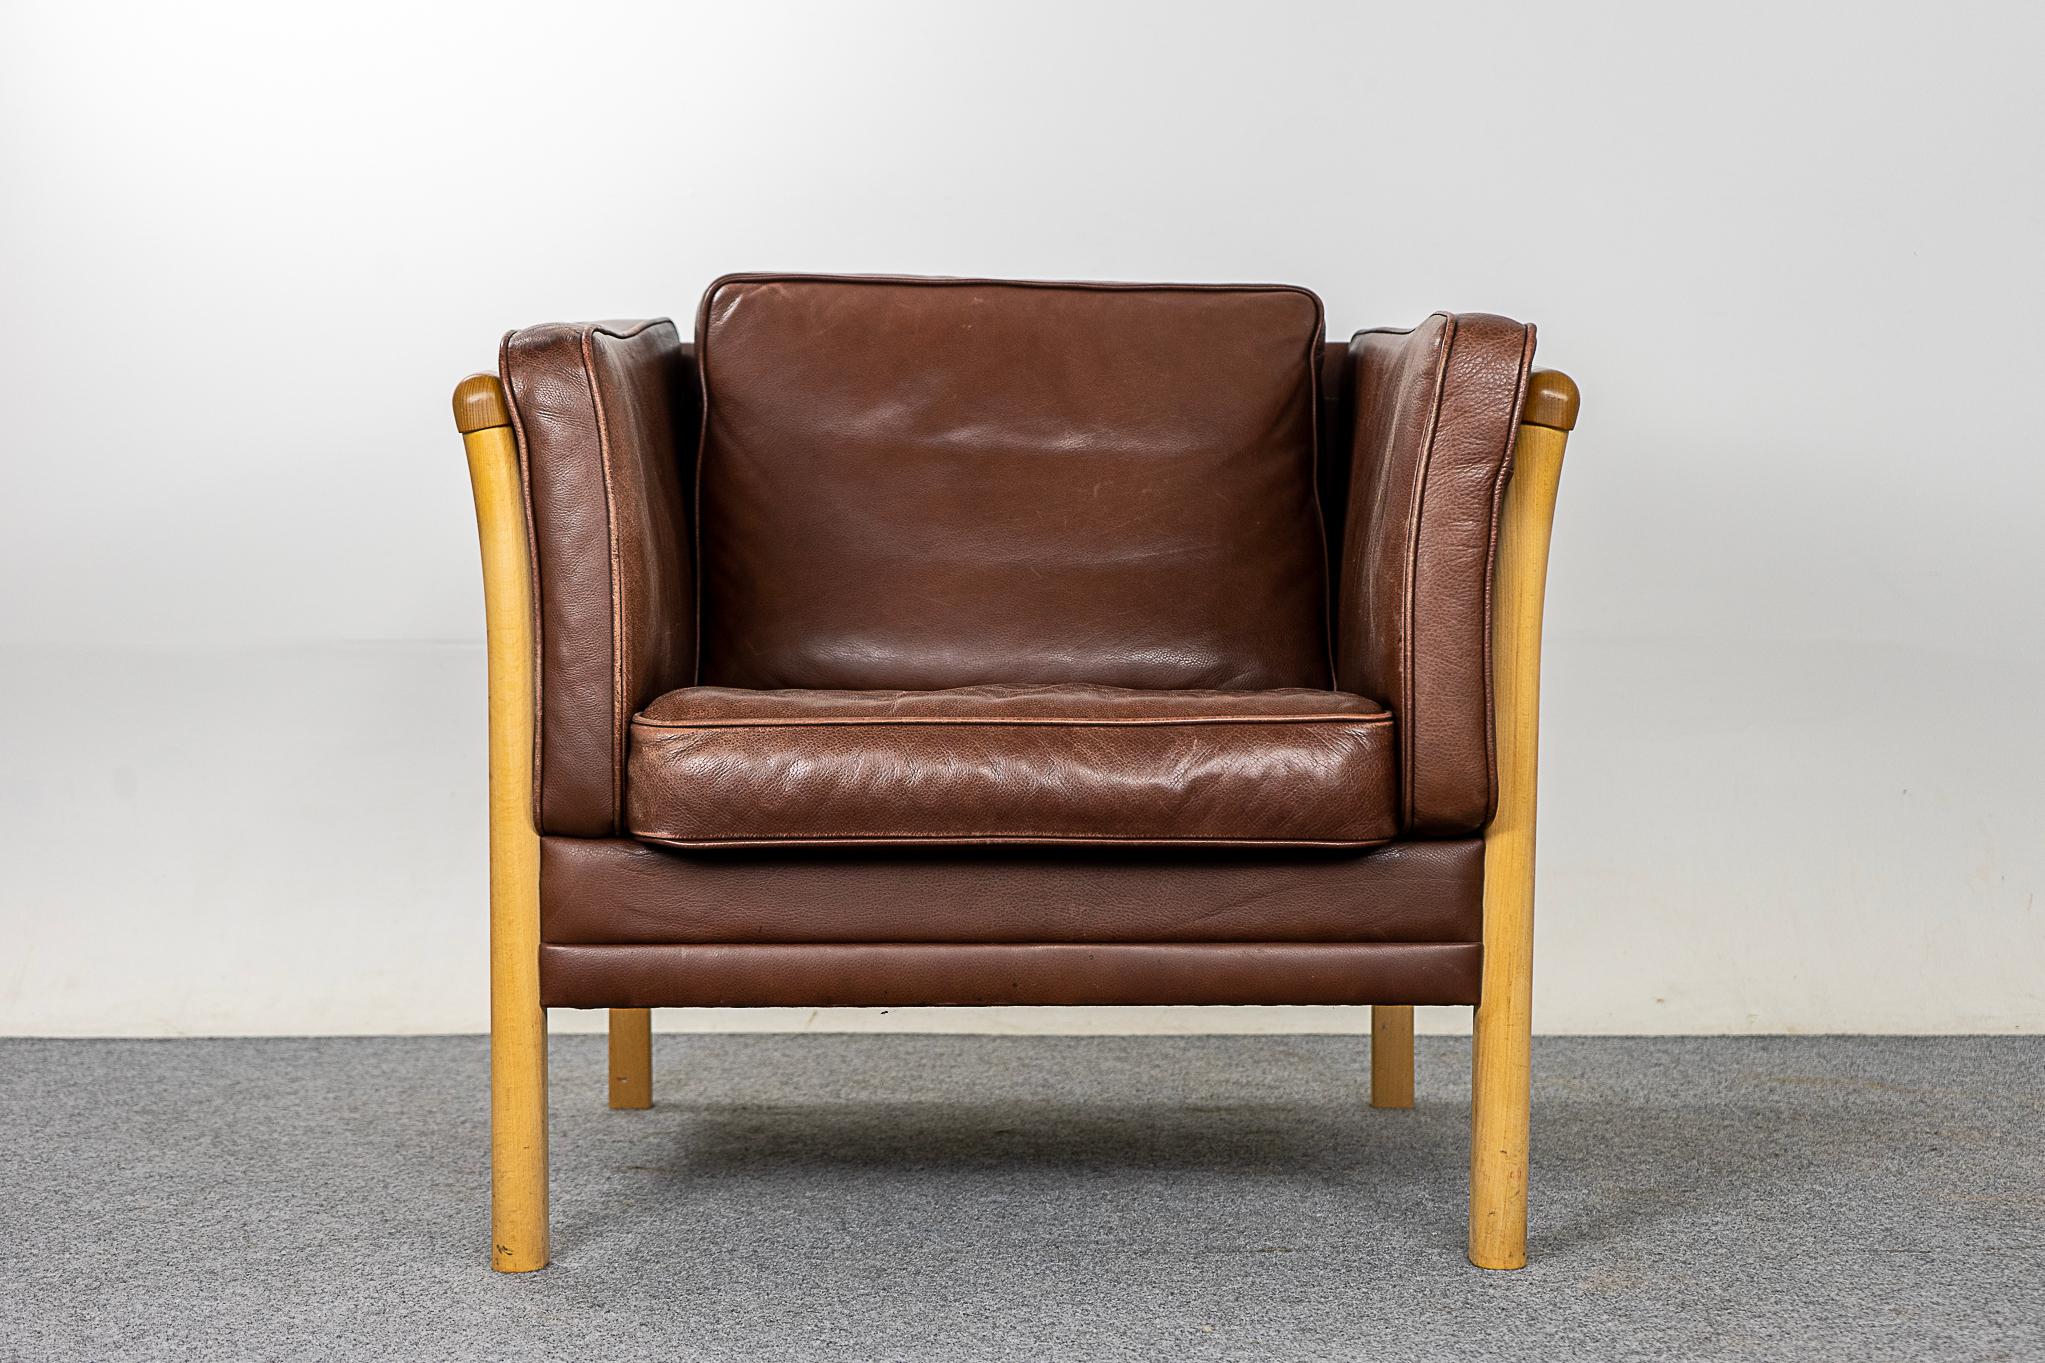 Beech wood & leather Danish lounge chair, circa 1960's. Clean modern solid wood frame with unique slatted sides with a slight bow shape. The leather cushions have the perfect amount of patina, some wear on the seat.  Chillax!   

Please inquire for